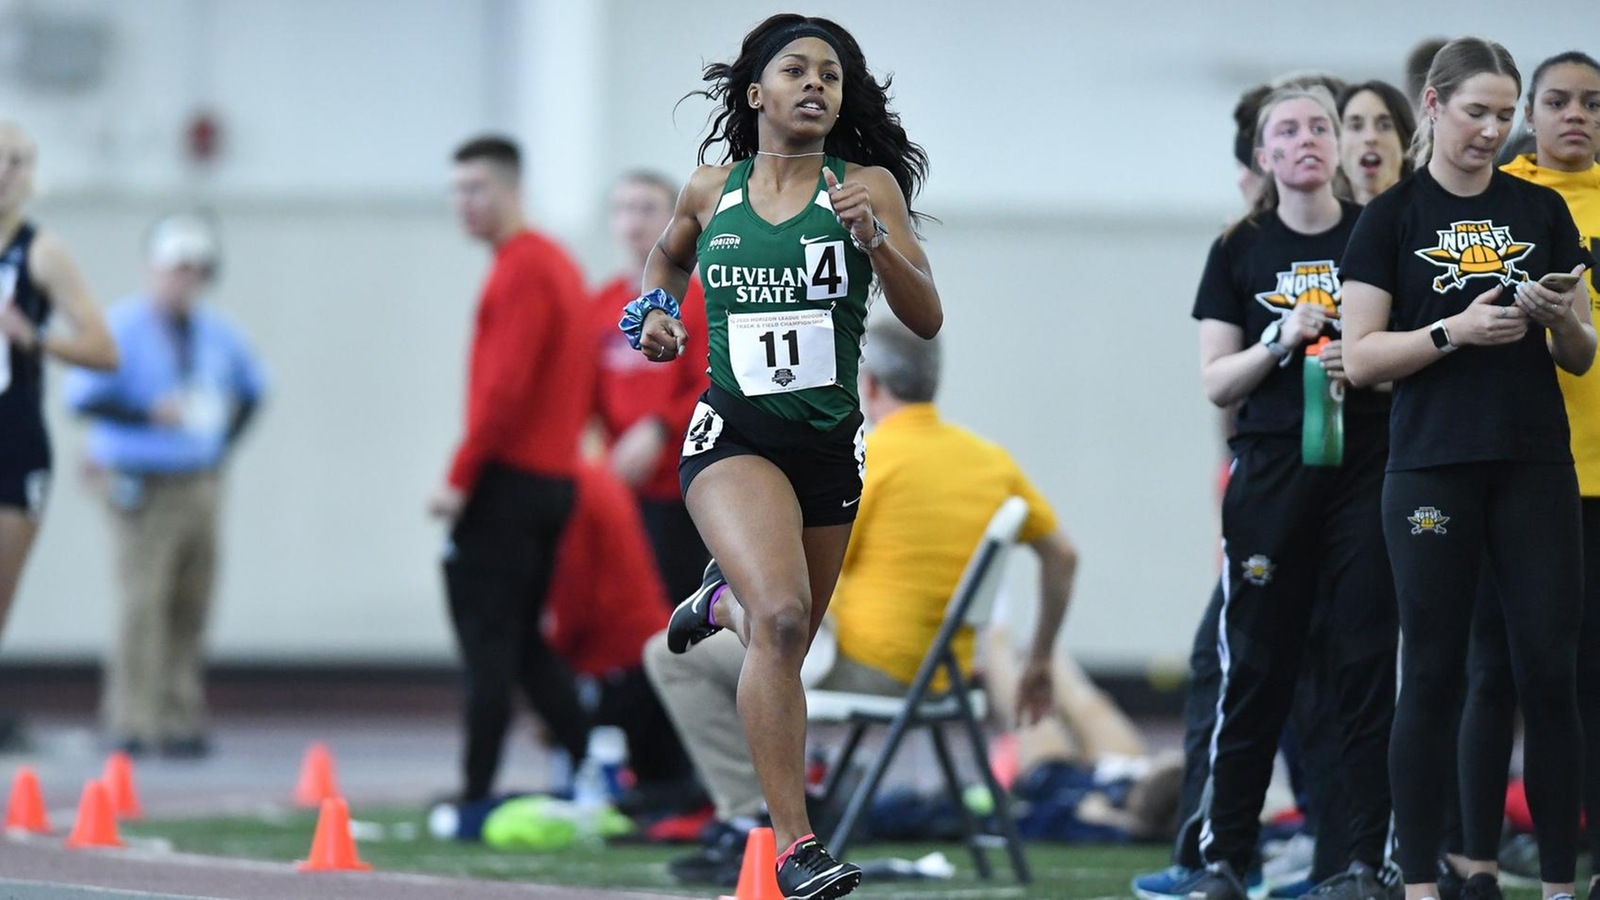 Vikings Record Five Podium Finishes On Day Two Of #HLTF Championships